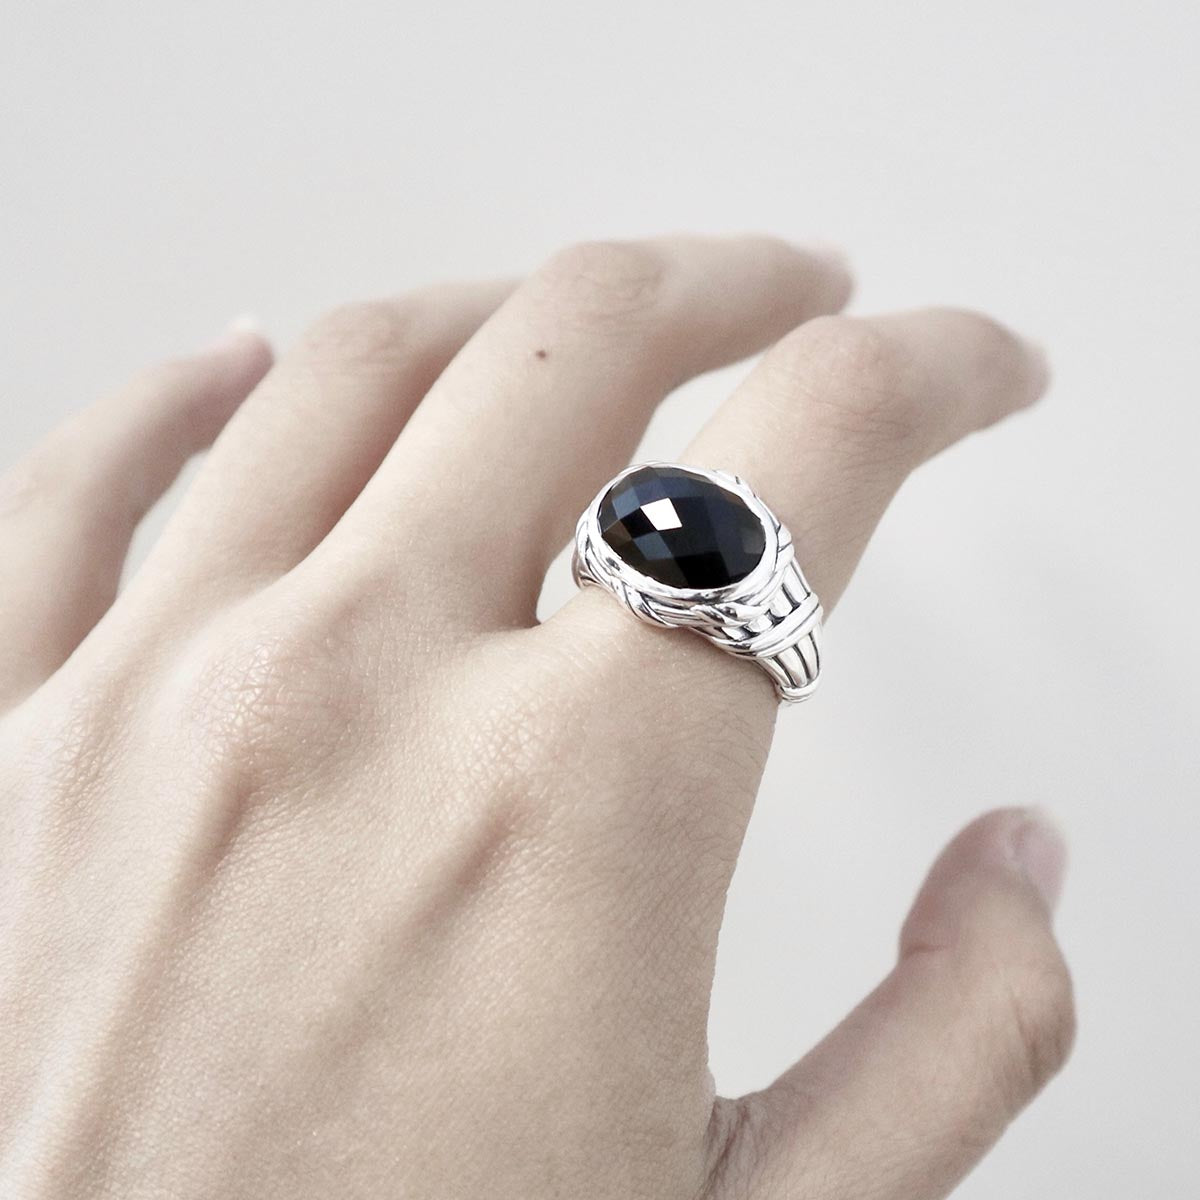 Reflections Statement Ring in sterling silver with black onyx